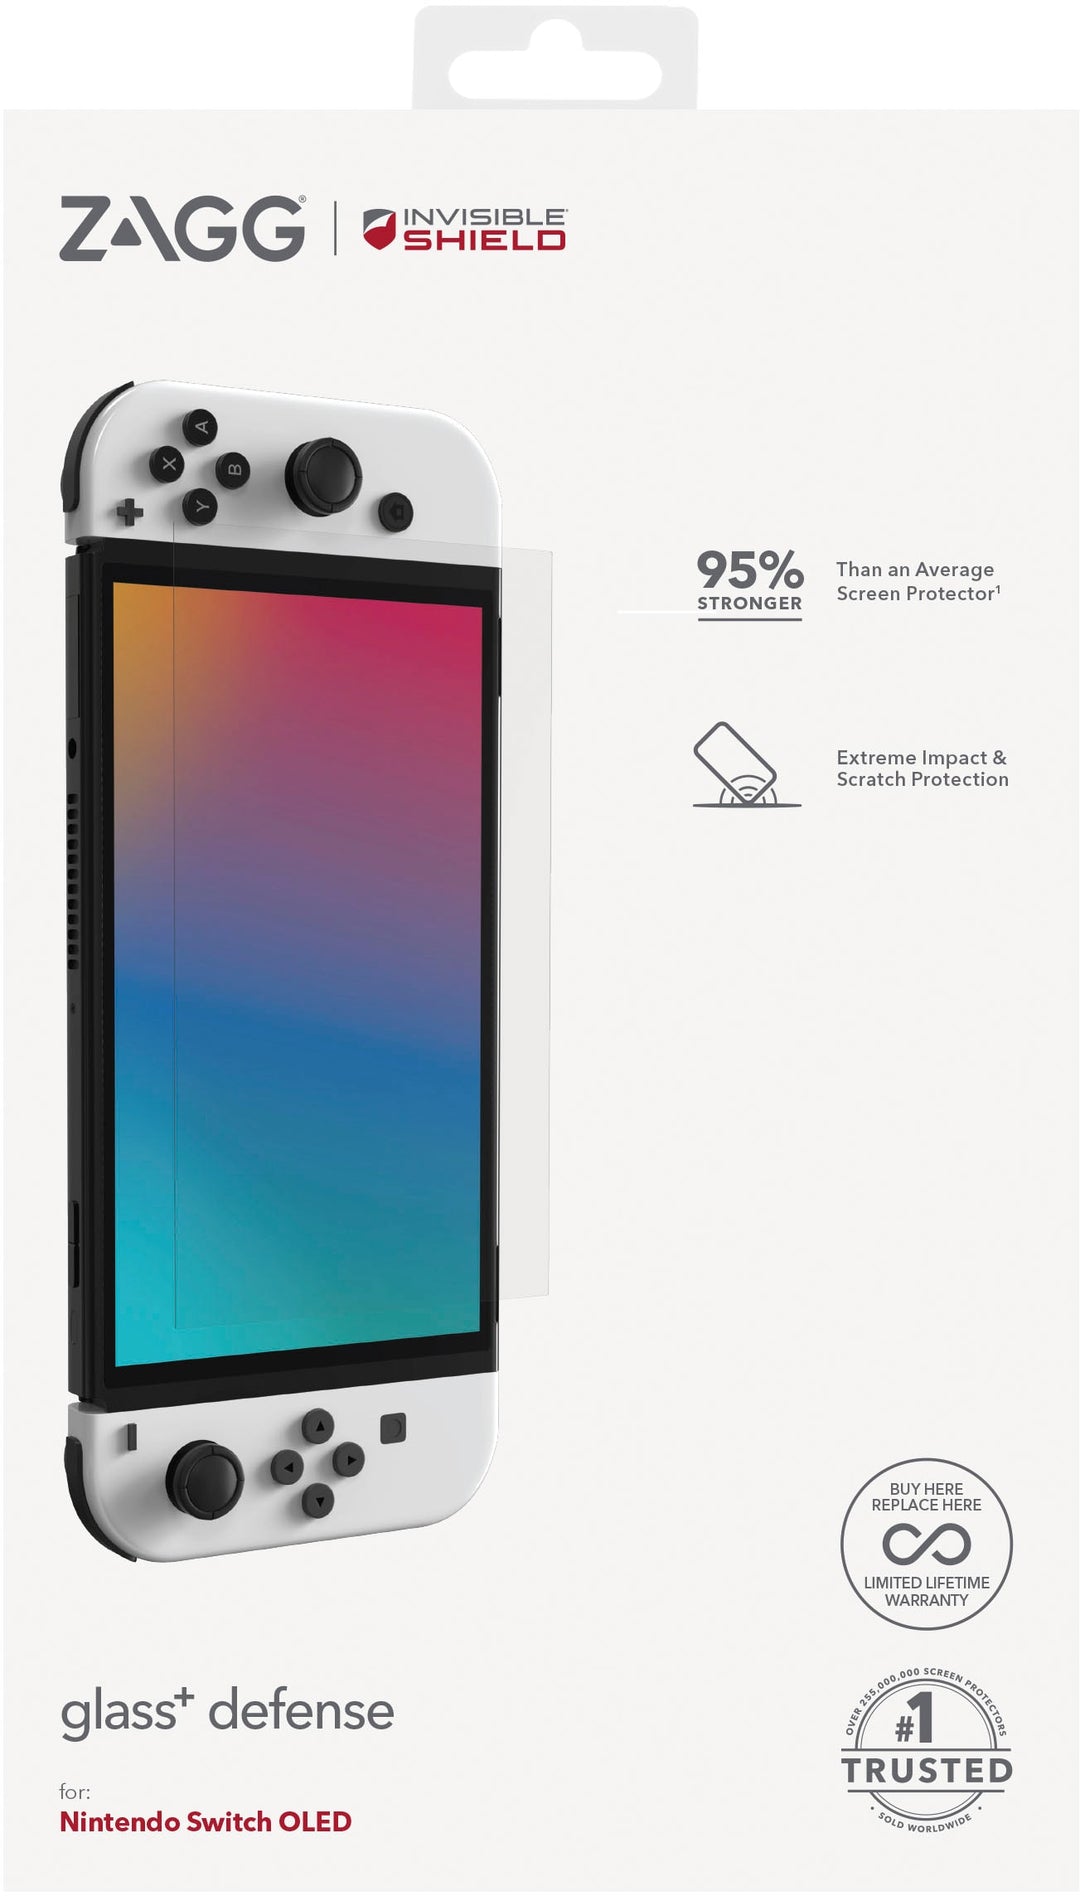 ZAGG - InvisibleShield Glass+ Defense Screen Protector for Nintendo Switch OLED_1